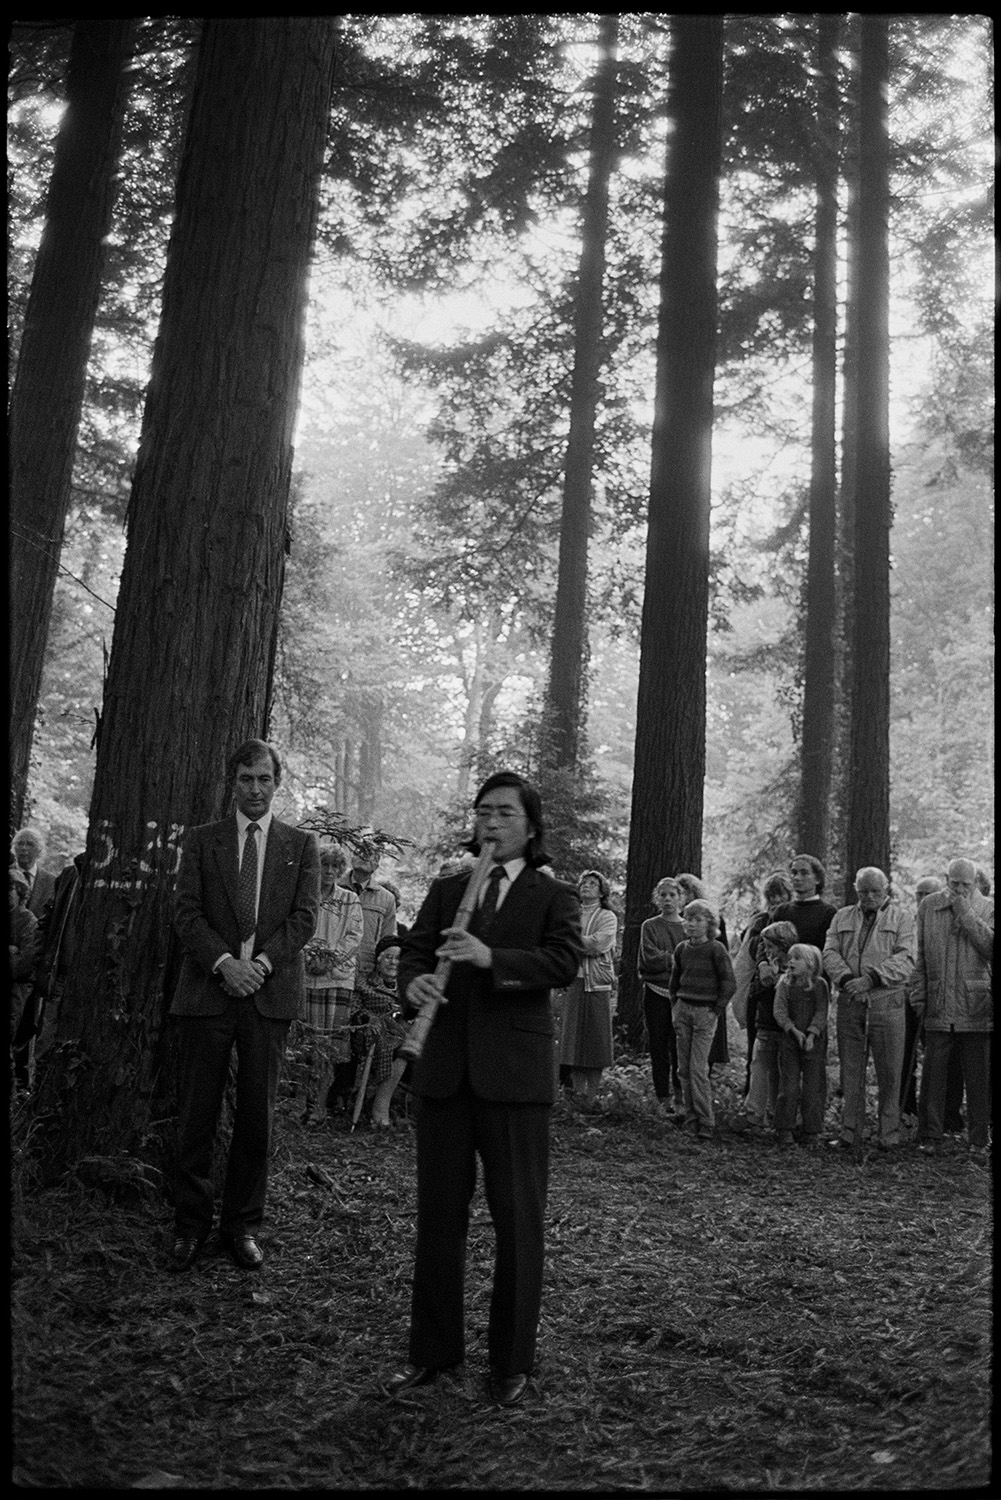 Spectators watching and listening to a musician playing a woodwind instrument at a ceremony in Dartington. The musician is wearing a dark suit and tie. There are tall fir trees in the background.